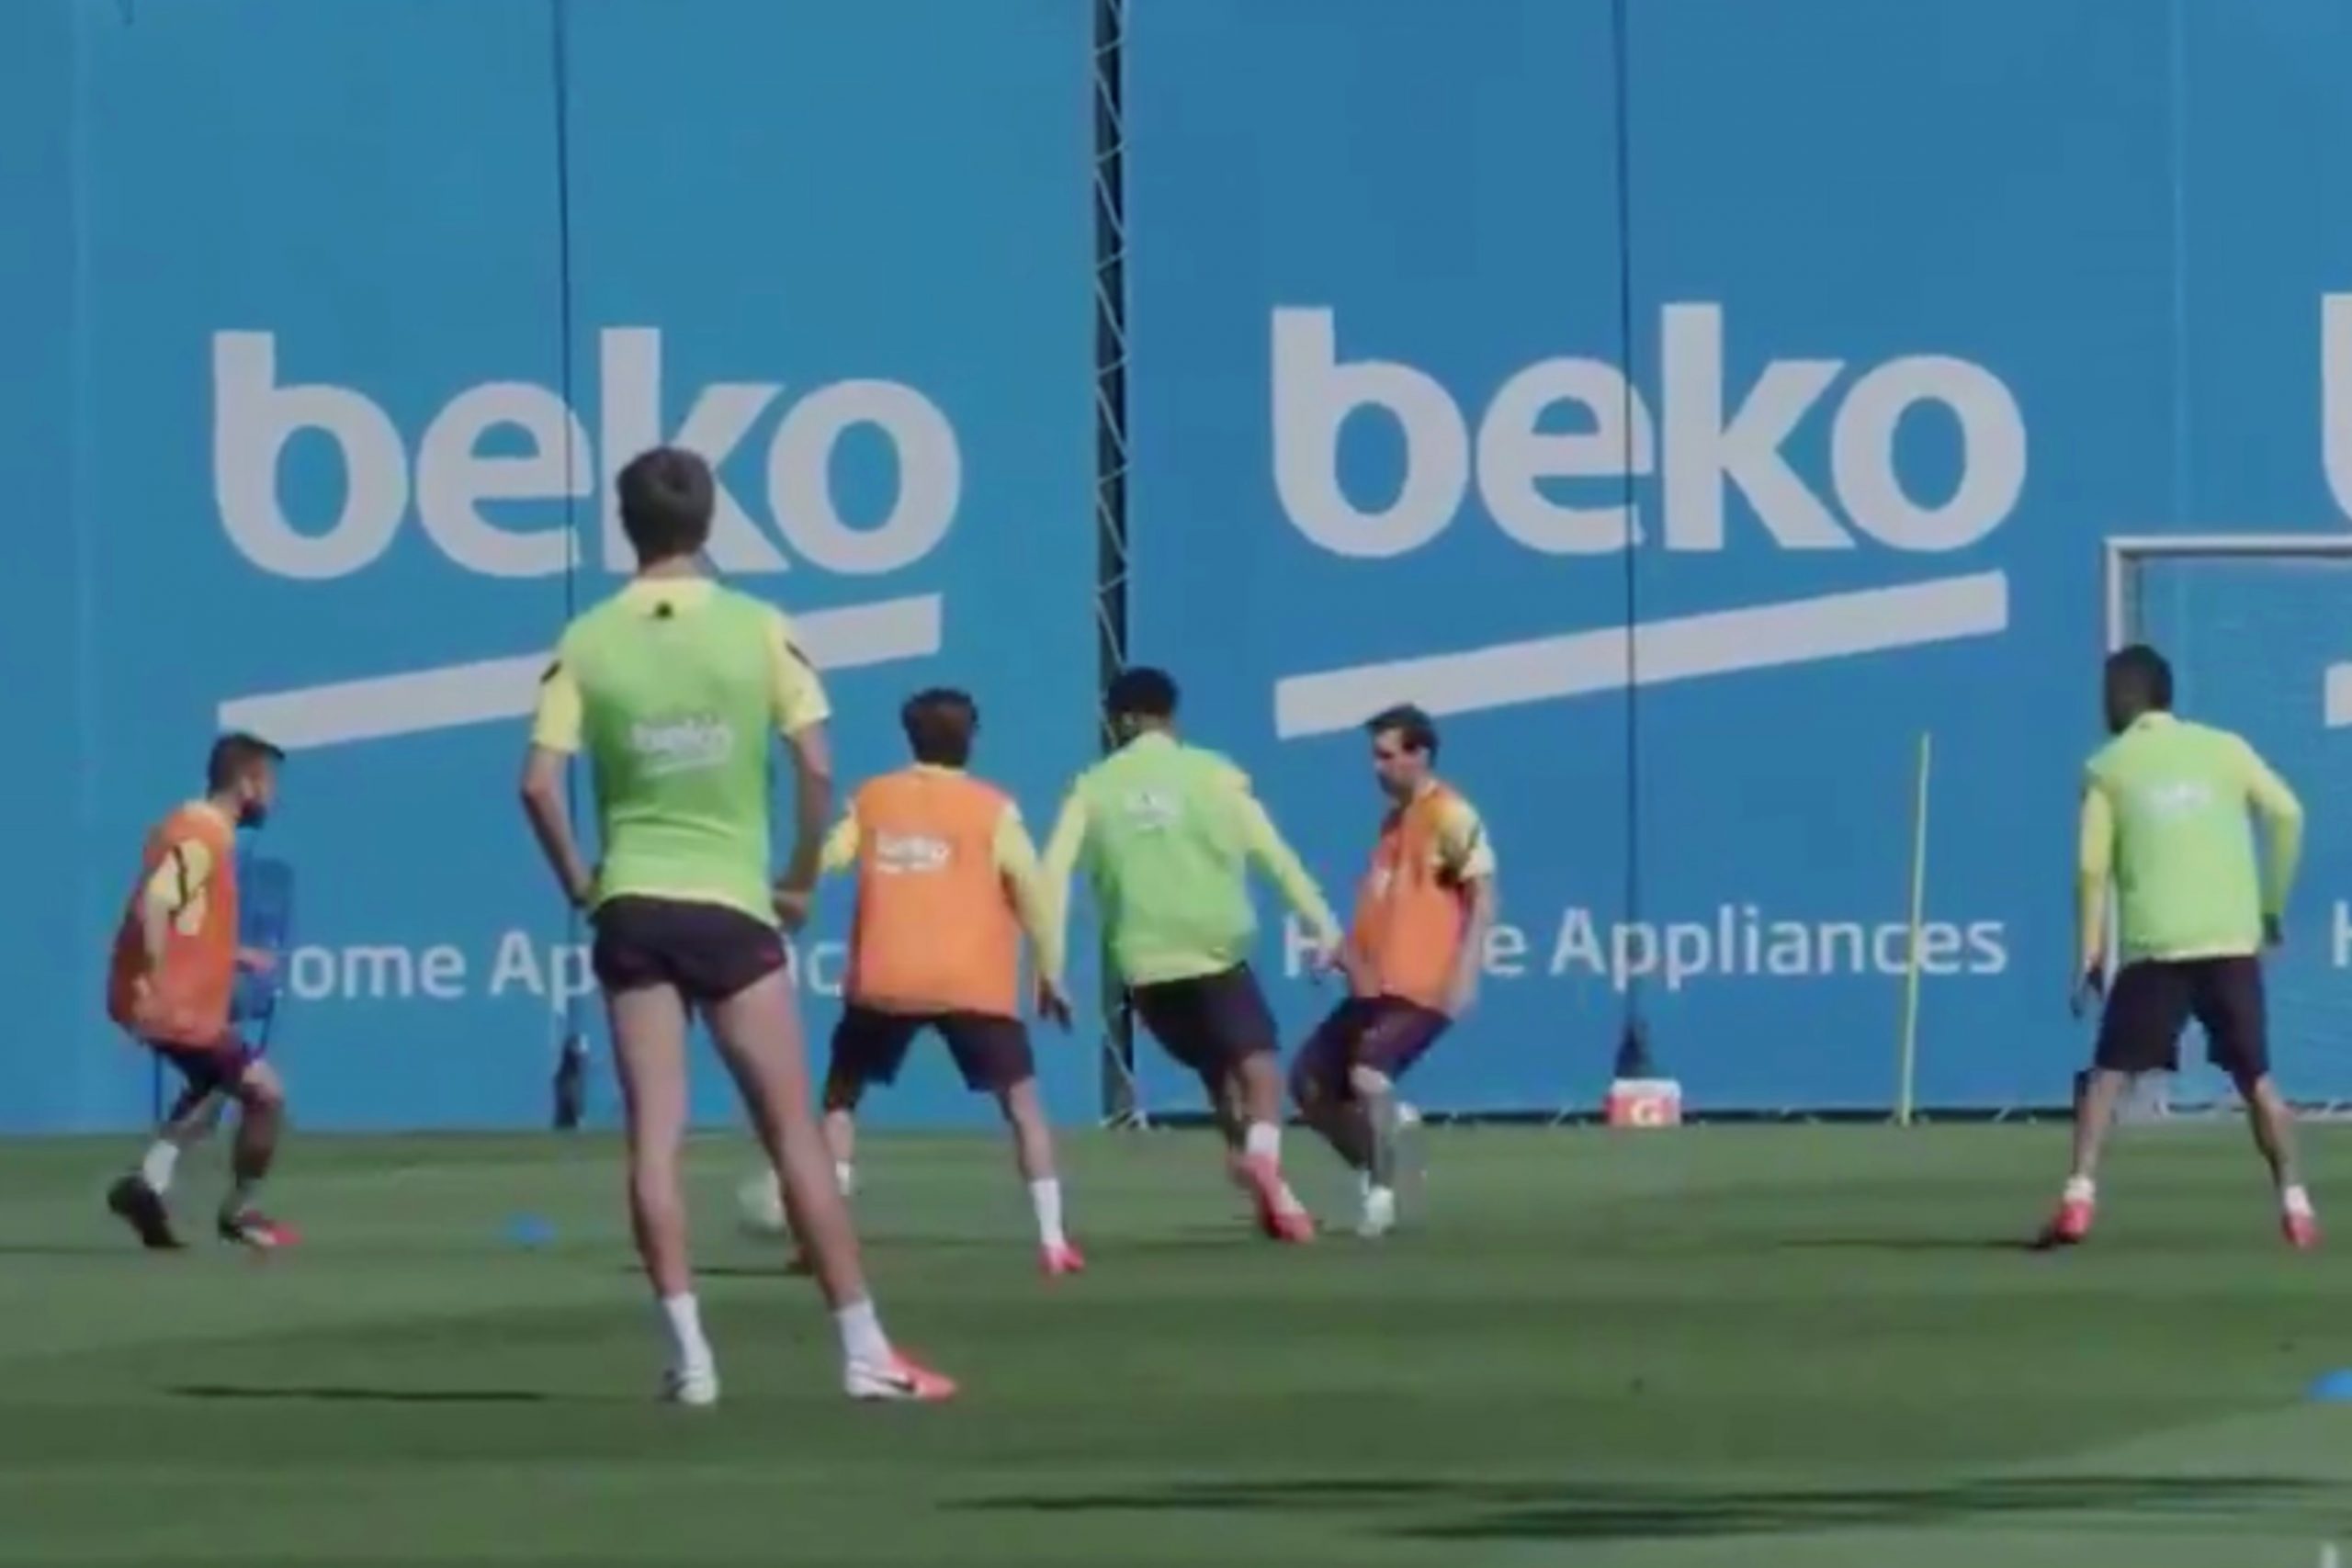 29 seconds of pure joy as Messi & co involved in a high-intensity rondo in training